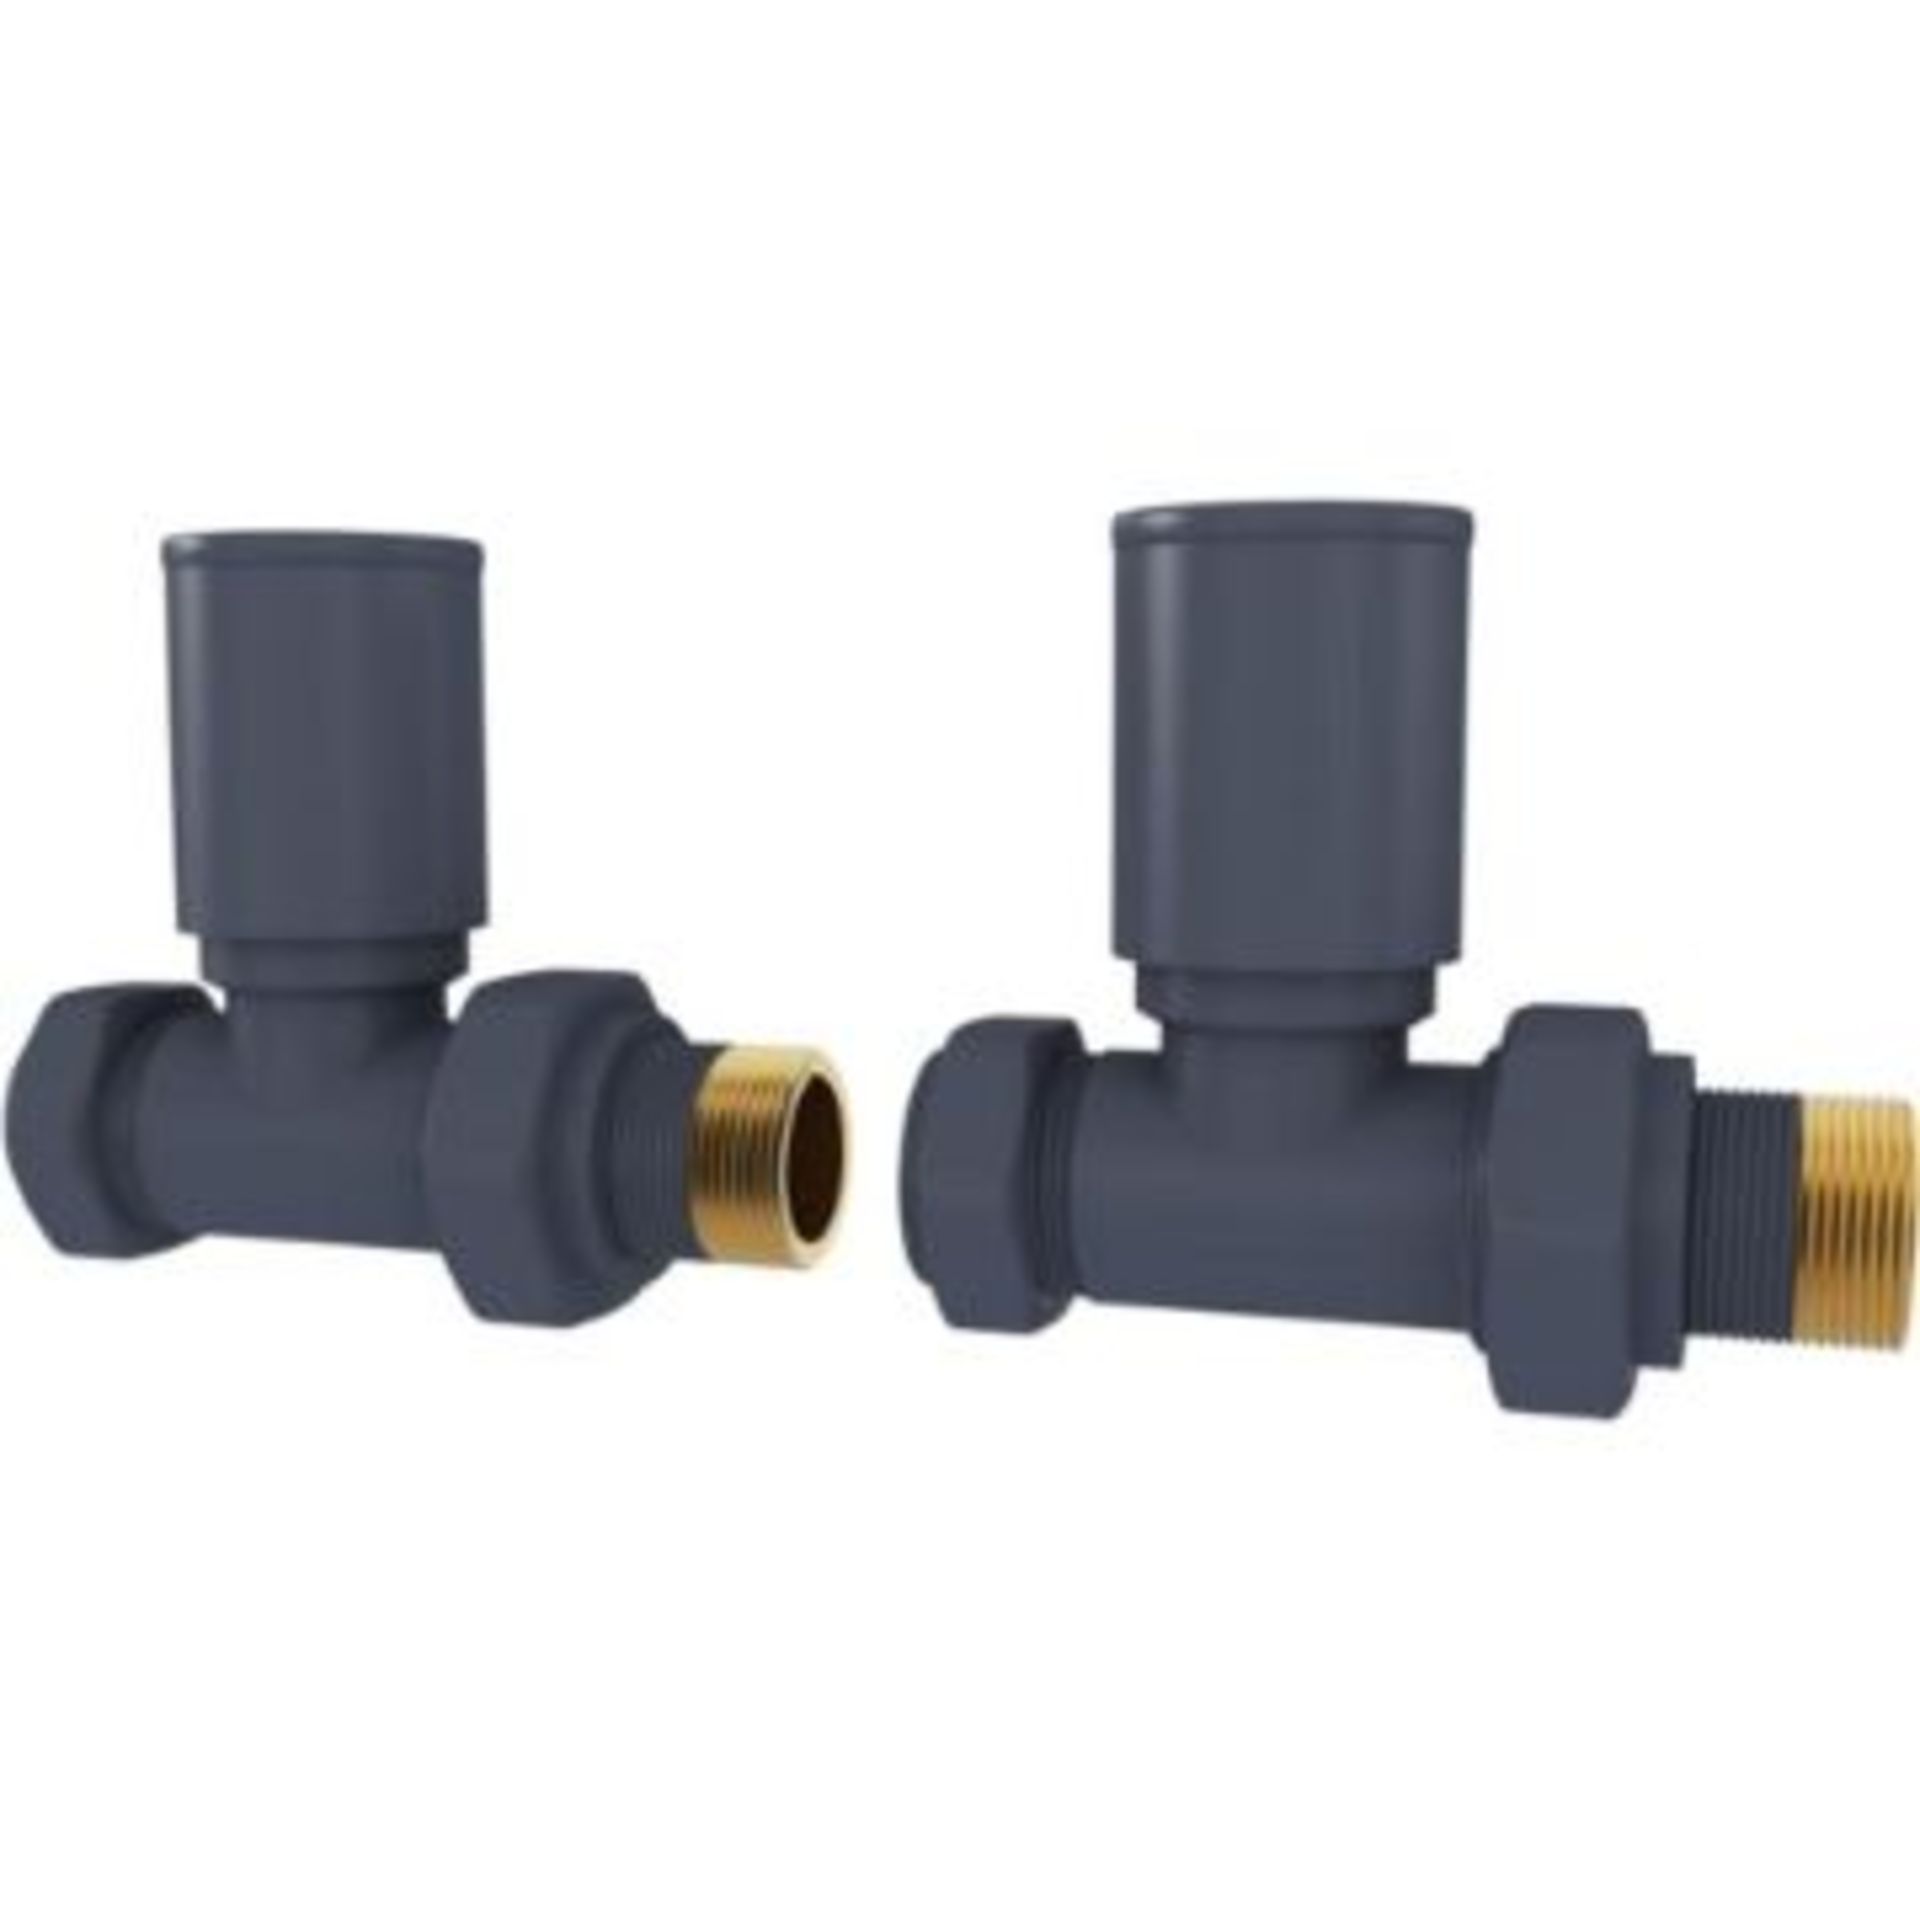 New & Boxed Round - Anthracite Radiator Valves Straight 15mm, Ra03S. 15mm Connection For Pipework